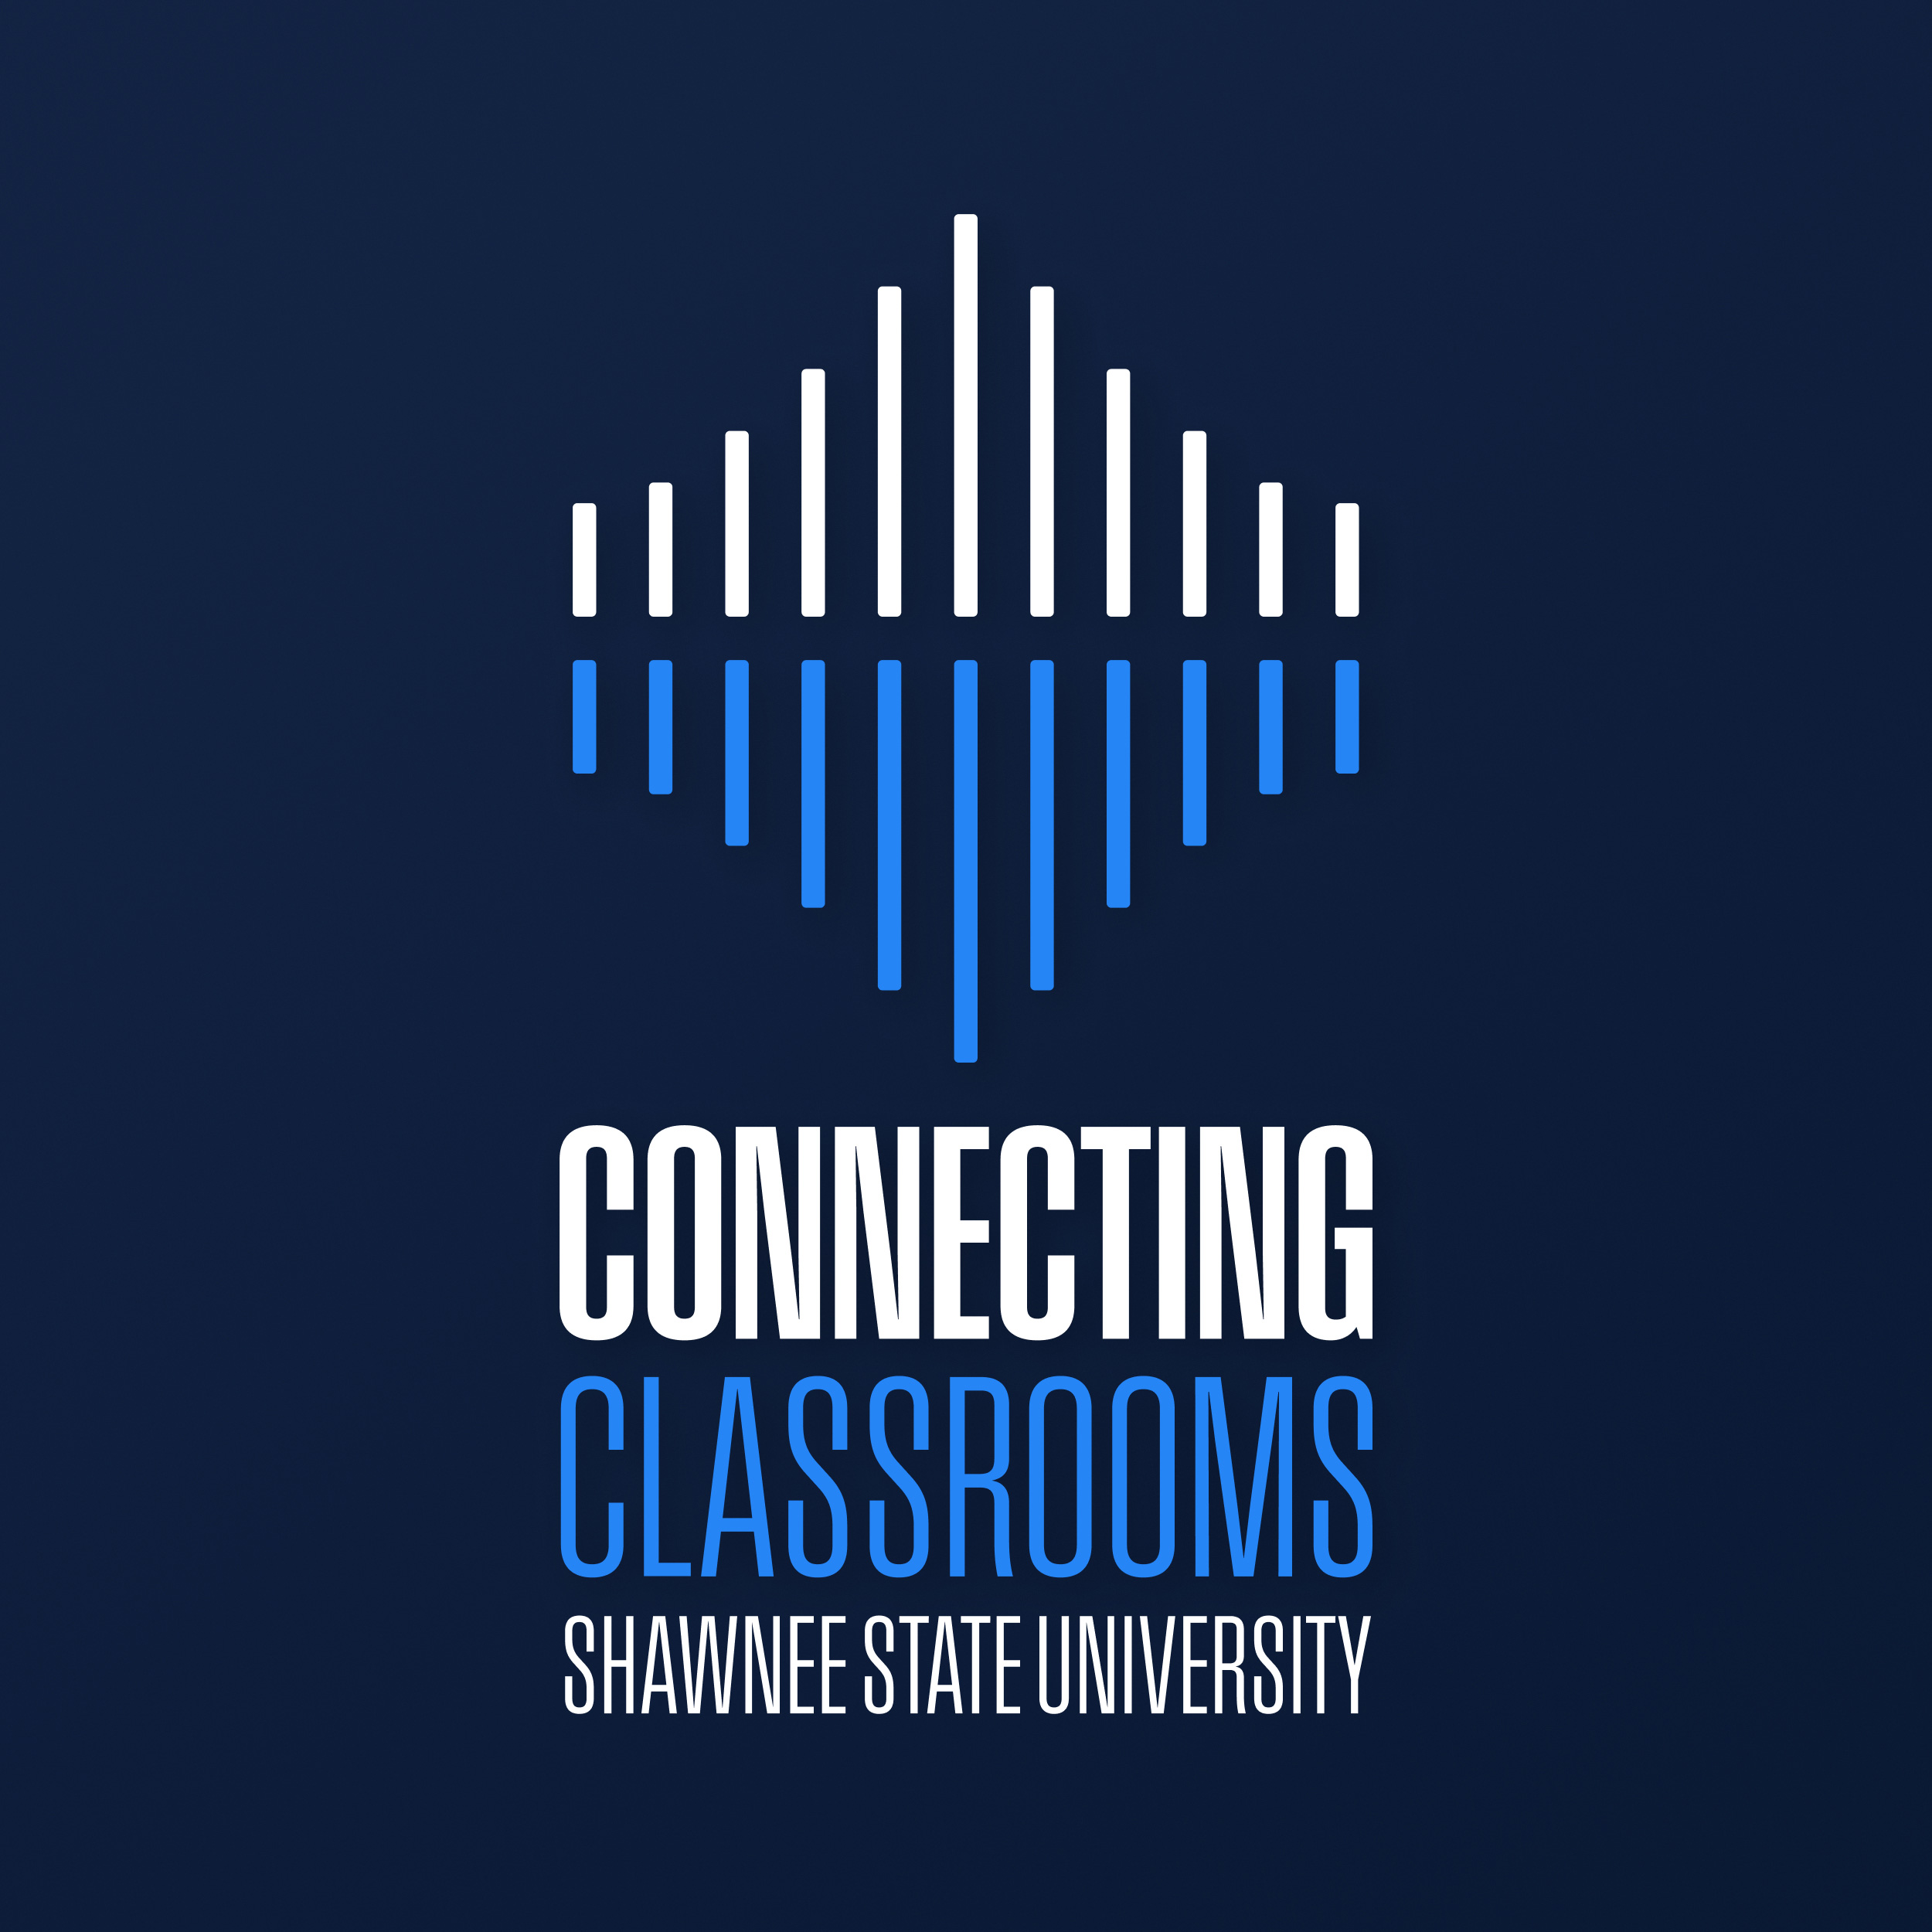 Logo with line image reminiscent of both a cable stay bridge and the sound bars on a mixing board. Text reads: Connecting Classrooms Shawnee State University